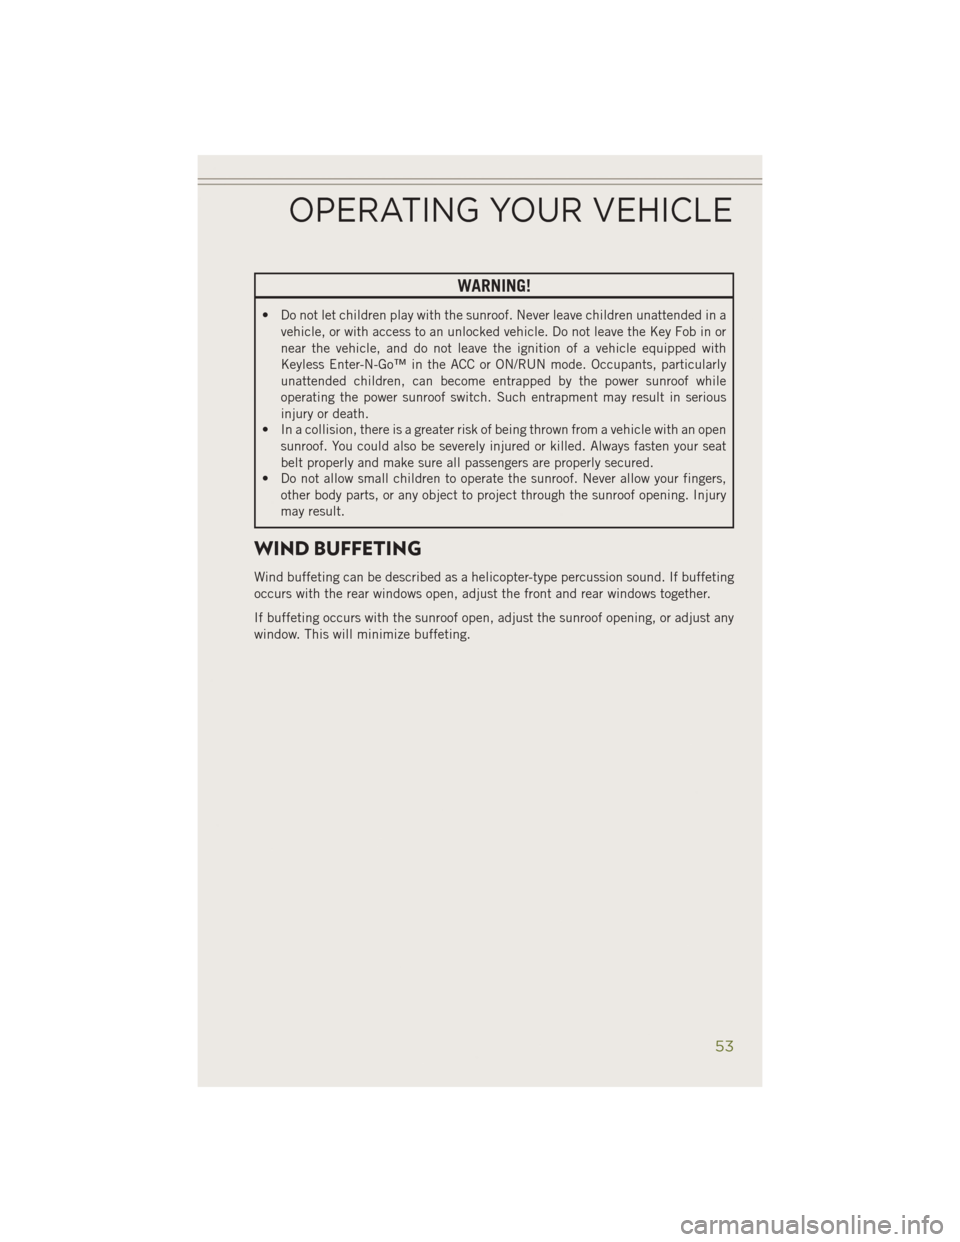 JEEP CHEROKEE 2014 KL / 5.G User Guide WARNING!
• Do not let children play with the sunroof. Never leave children unattended in avehicle, or with access to an unlocked vehicle. Do not leave the Key Fob in or
near the vehicle, and do not 